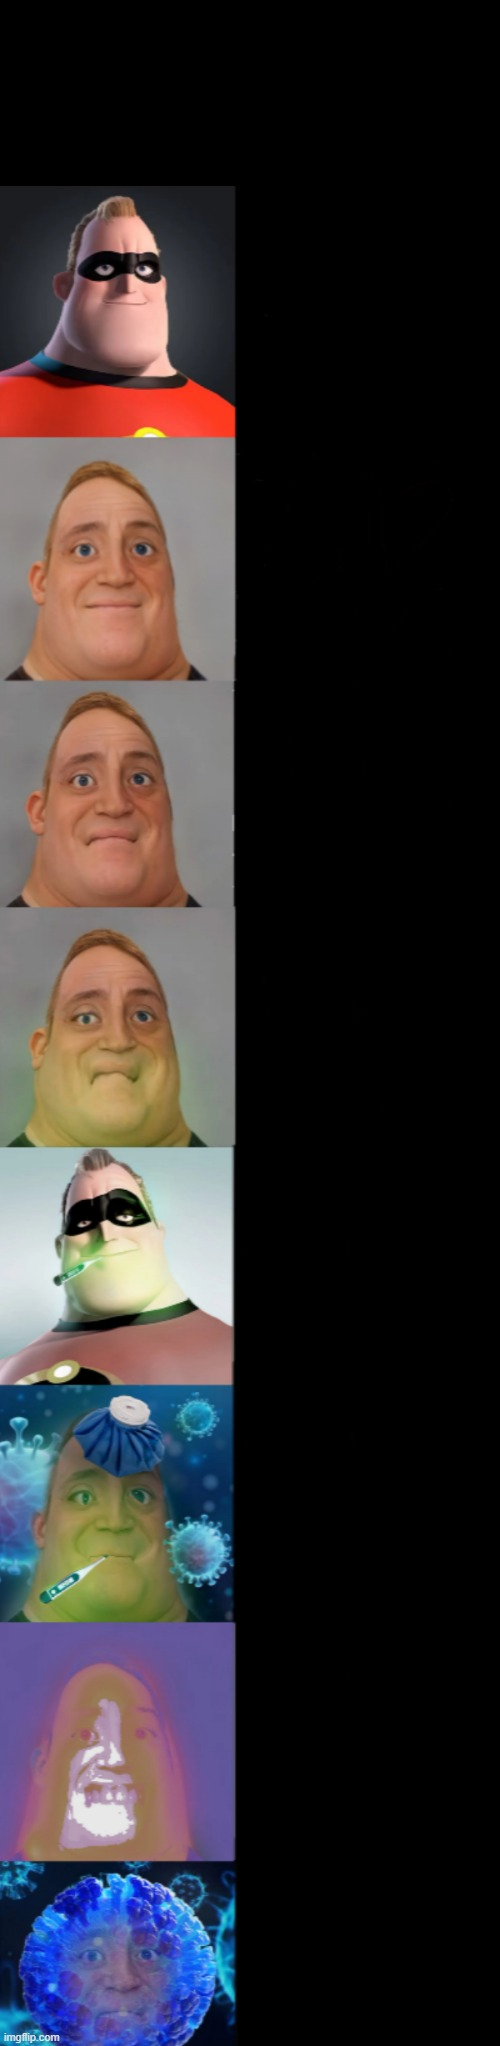 High Quality Mr incredible becoming sick(Fixed Textboxes) Blank Meme Template